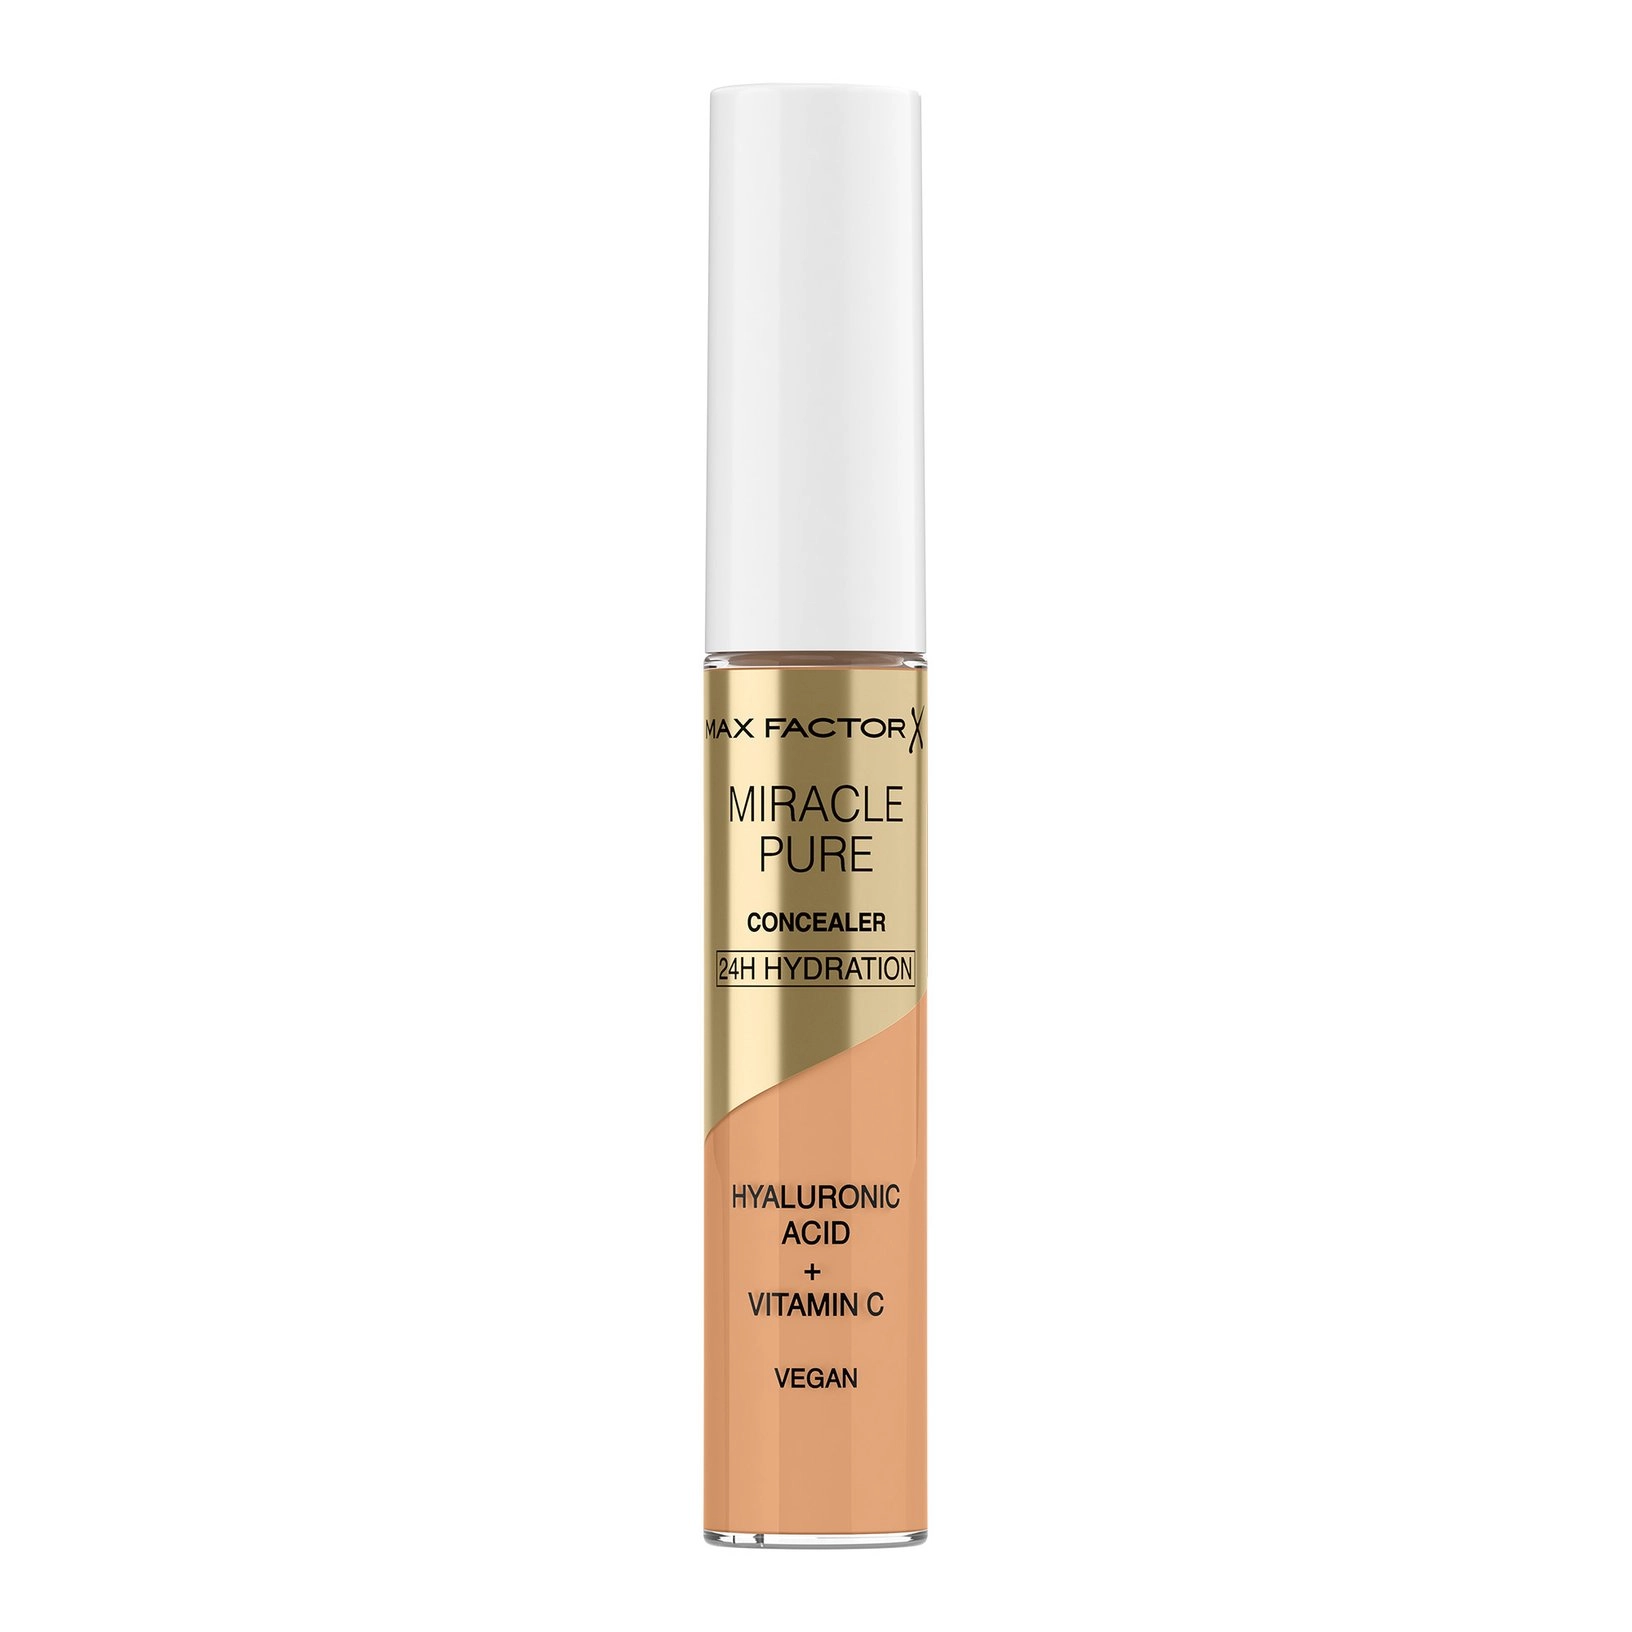 Image of Max Factor - Miracle Pure Concealer - 03